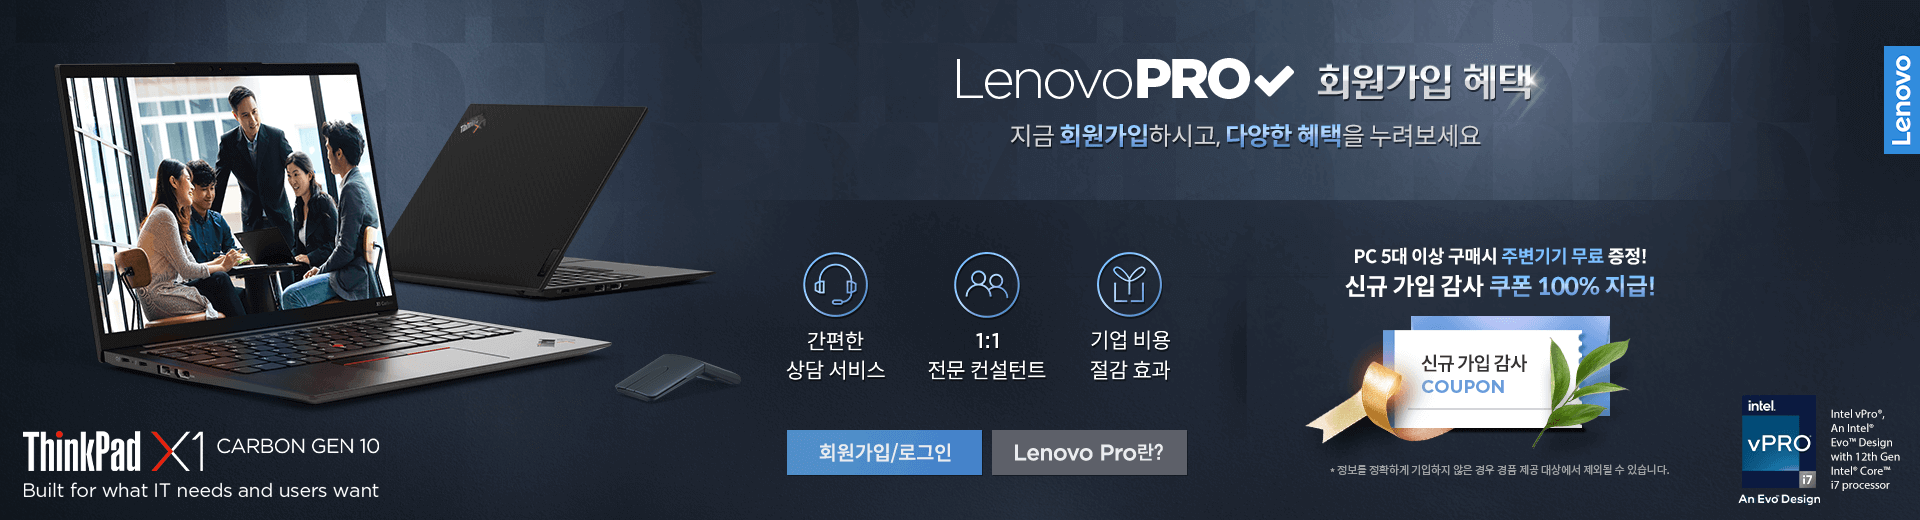 LenovoPRO, Your Trusted IT Partner